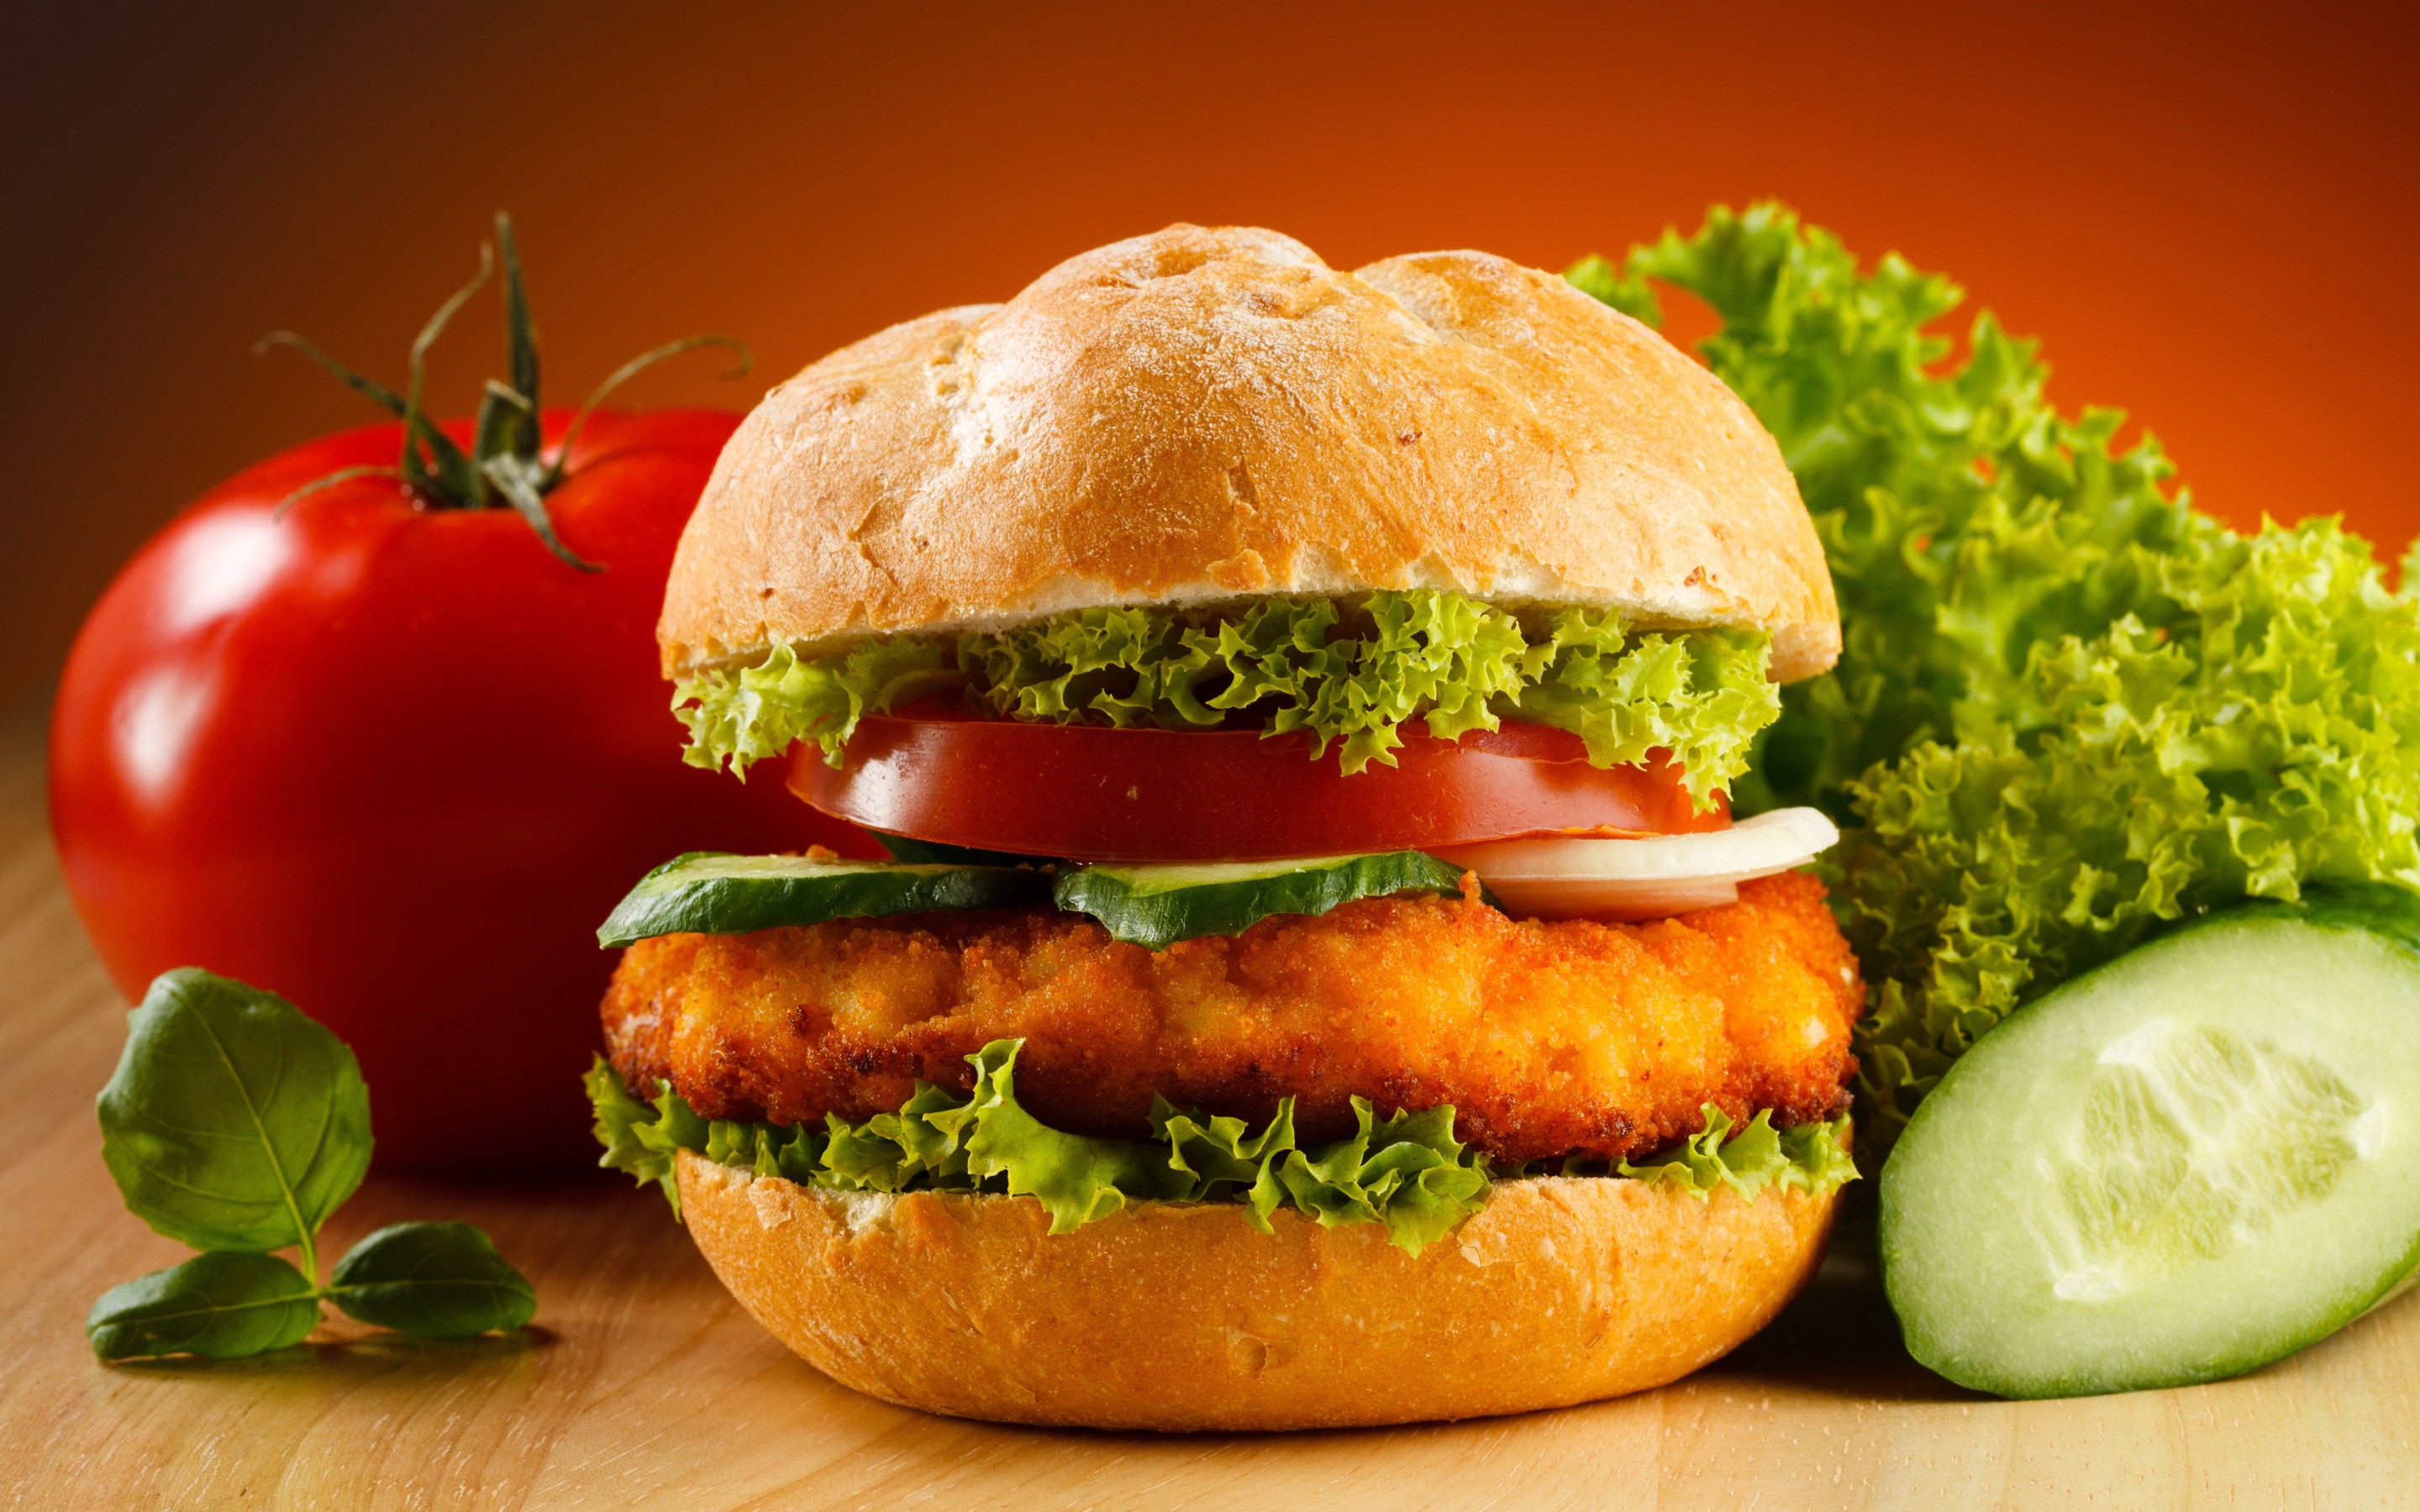 General 2880x1800 burgers food tomatoes vegetables meat pickles salad red background closeup